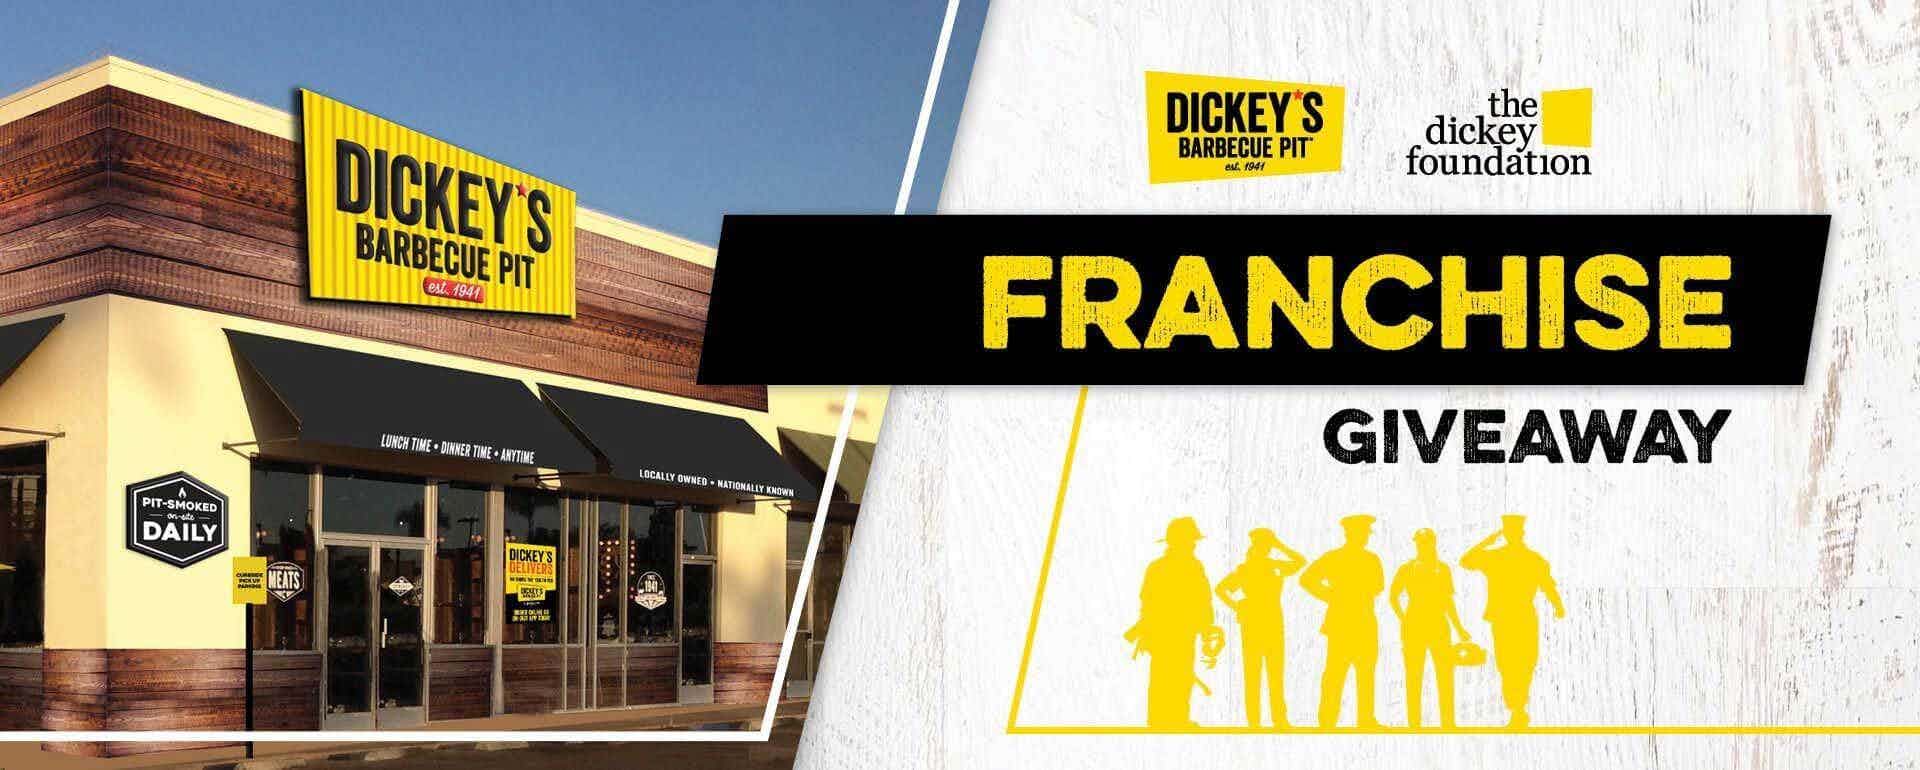 Be Your Own Pit Boss! Dickey’s Barbecue Pit Announces Franchise Fee Giveaway For First Responders, Active Military, and Veterans